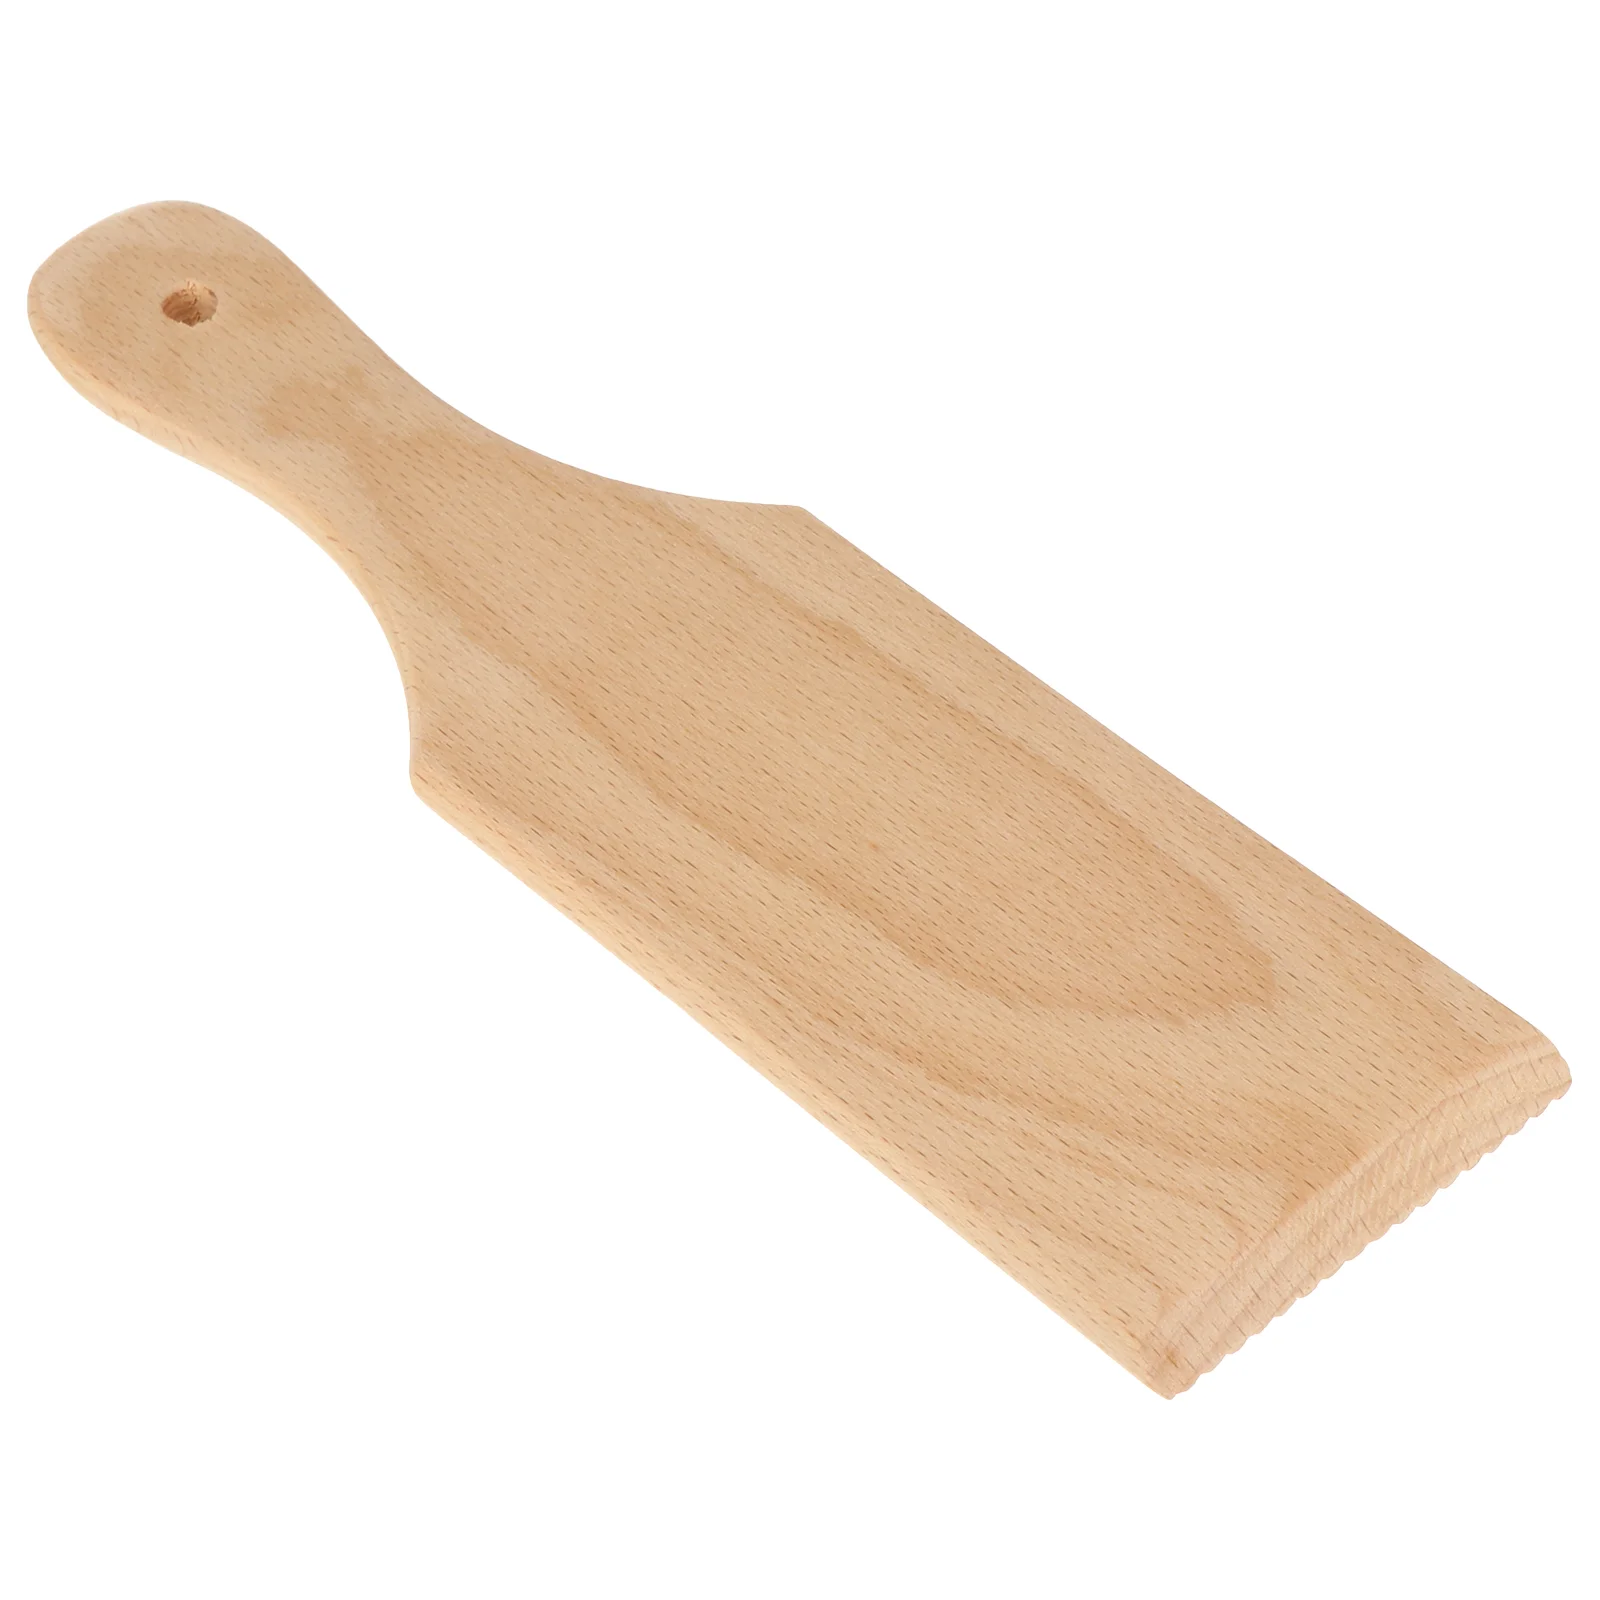 

Pasta Board Spaghetti Making Mold Wood Paddle Machine Butter Kitchen Gadget Wooden Baby Noodles Table Shaping